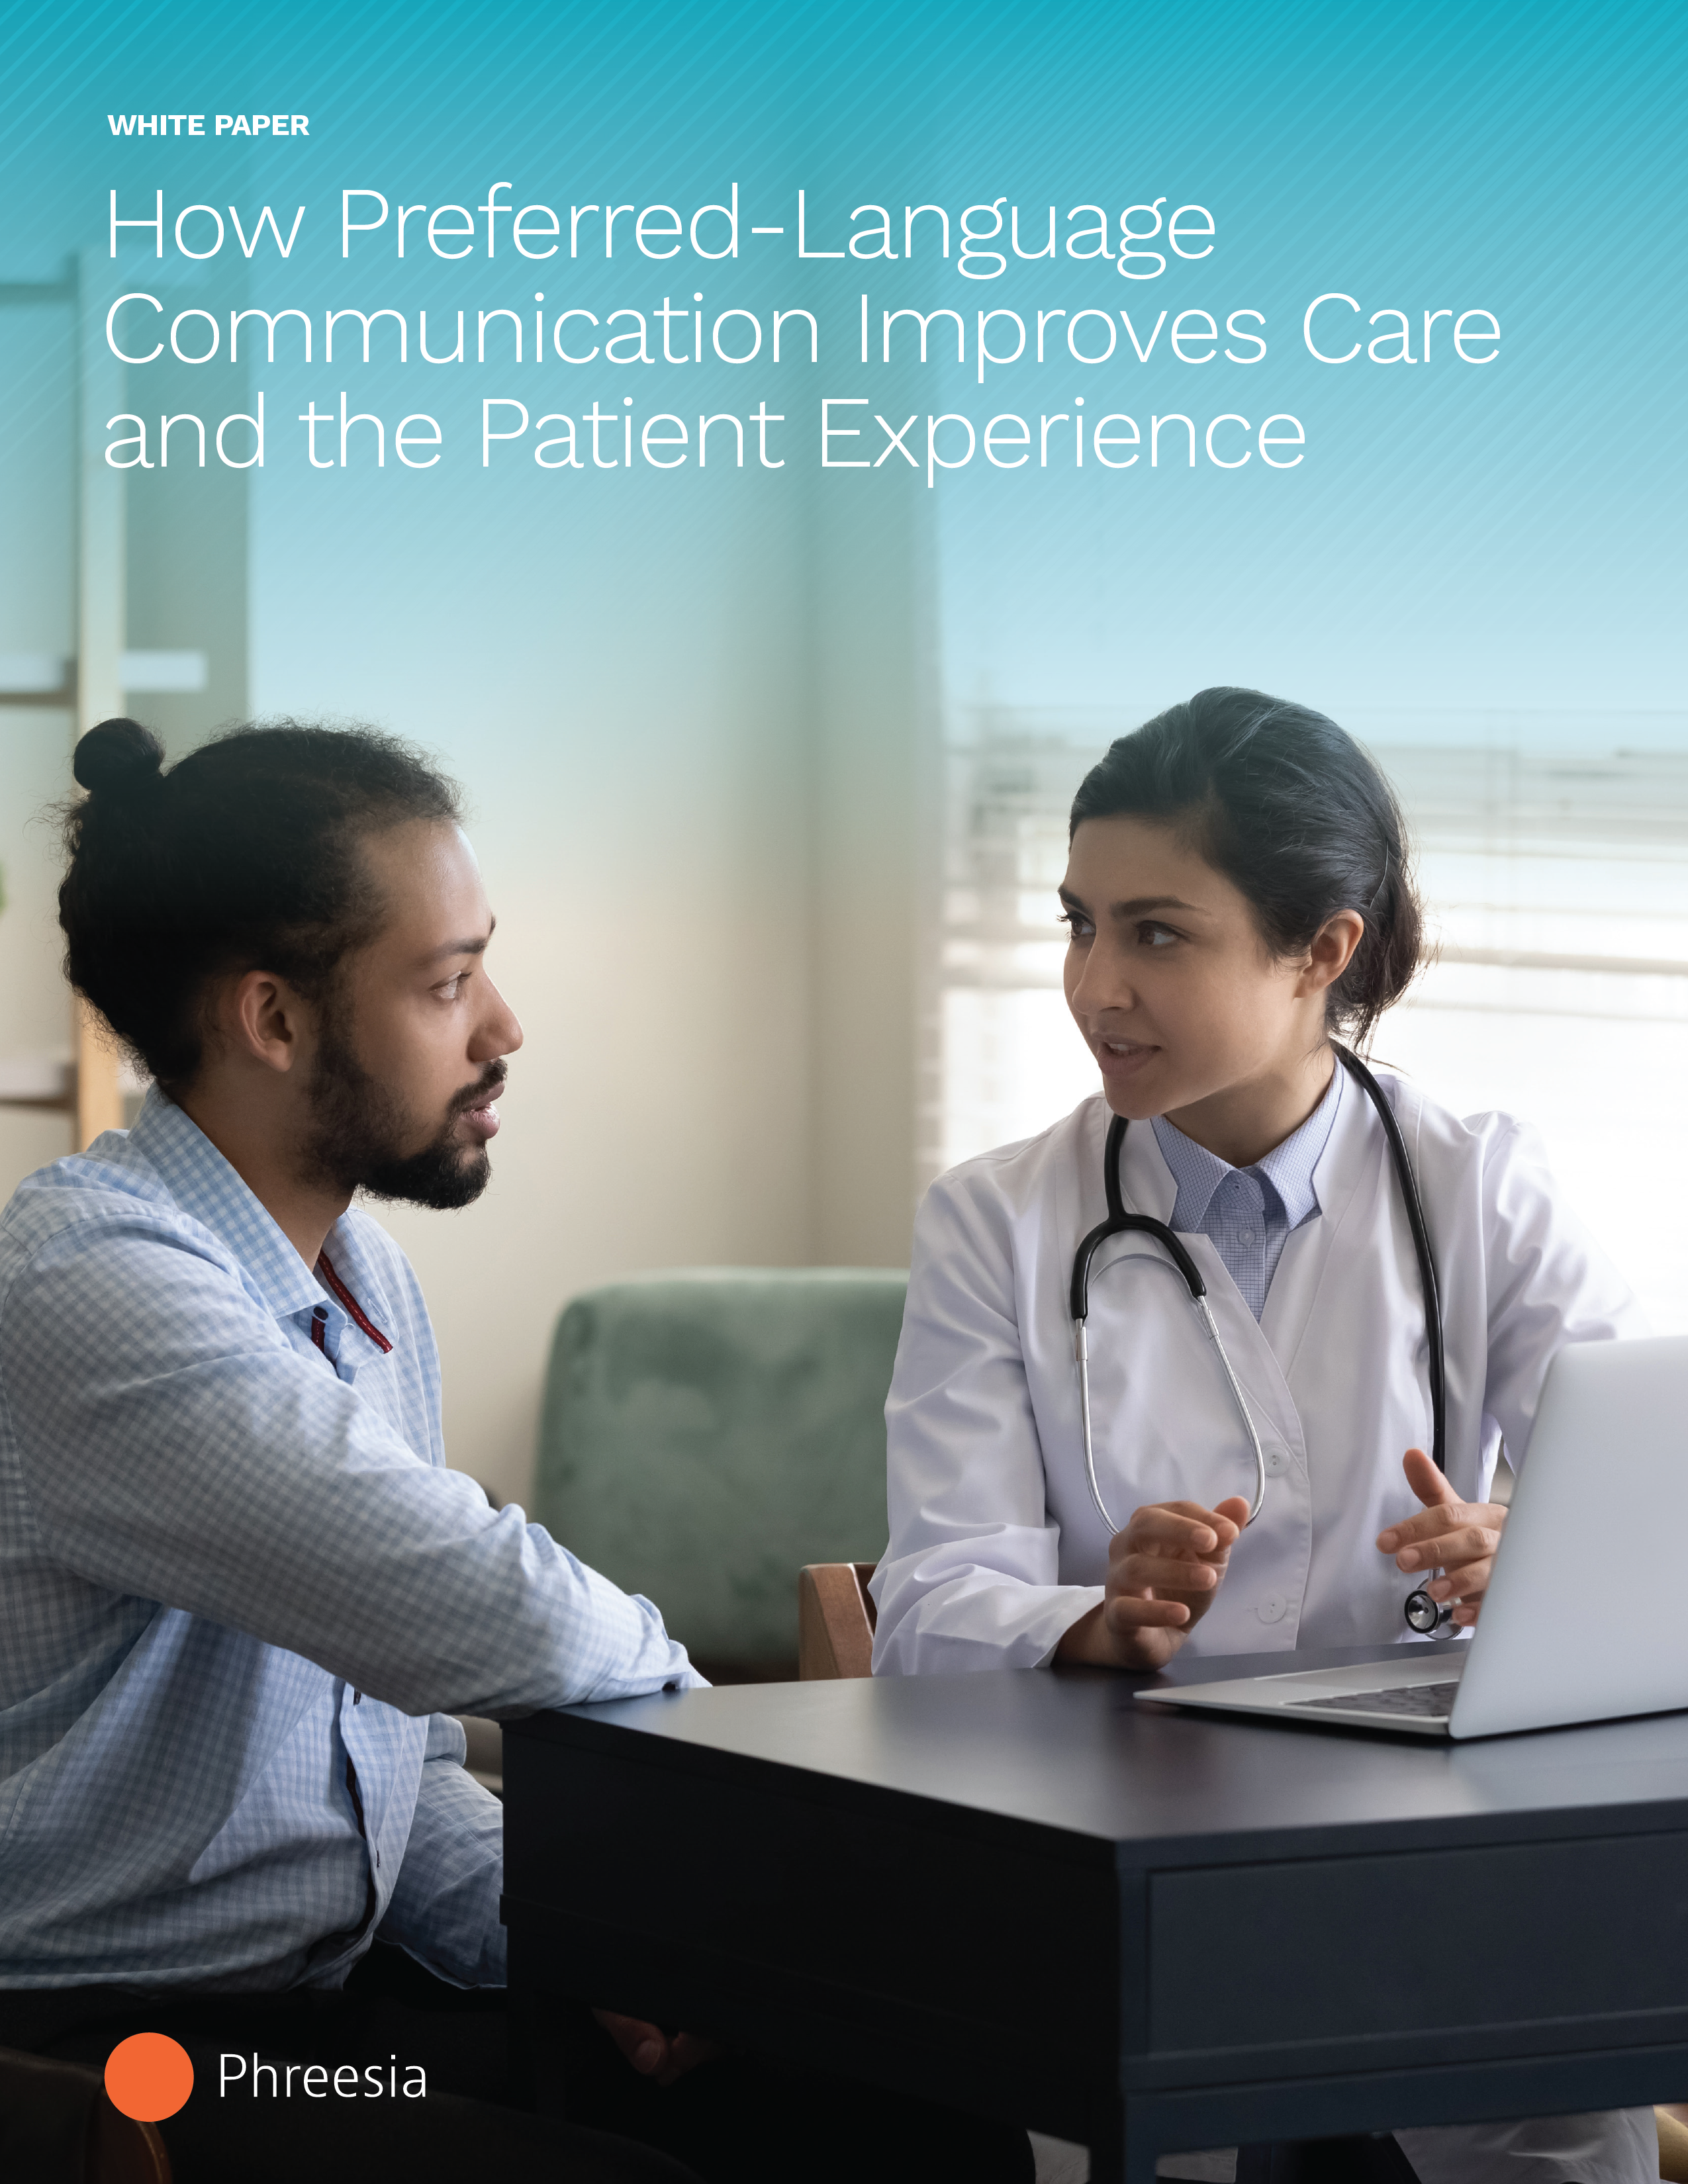 How Preferred-Language Communication Improves Care and the Patient Experience